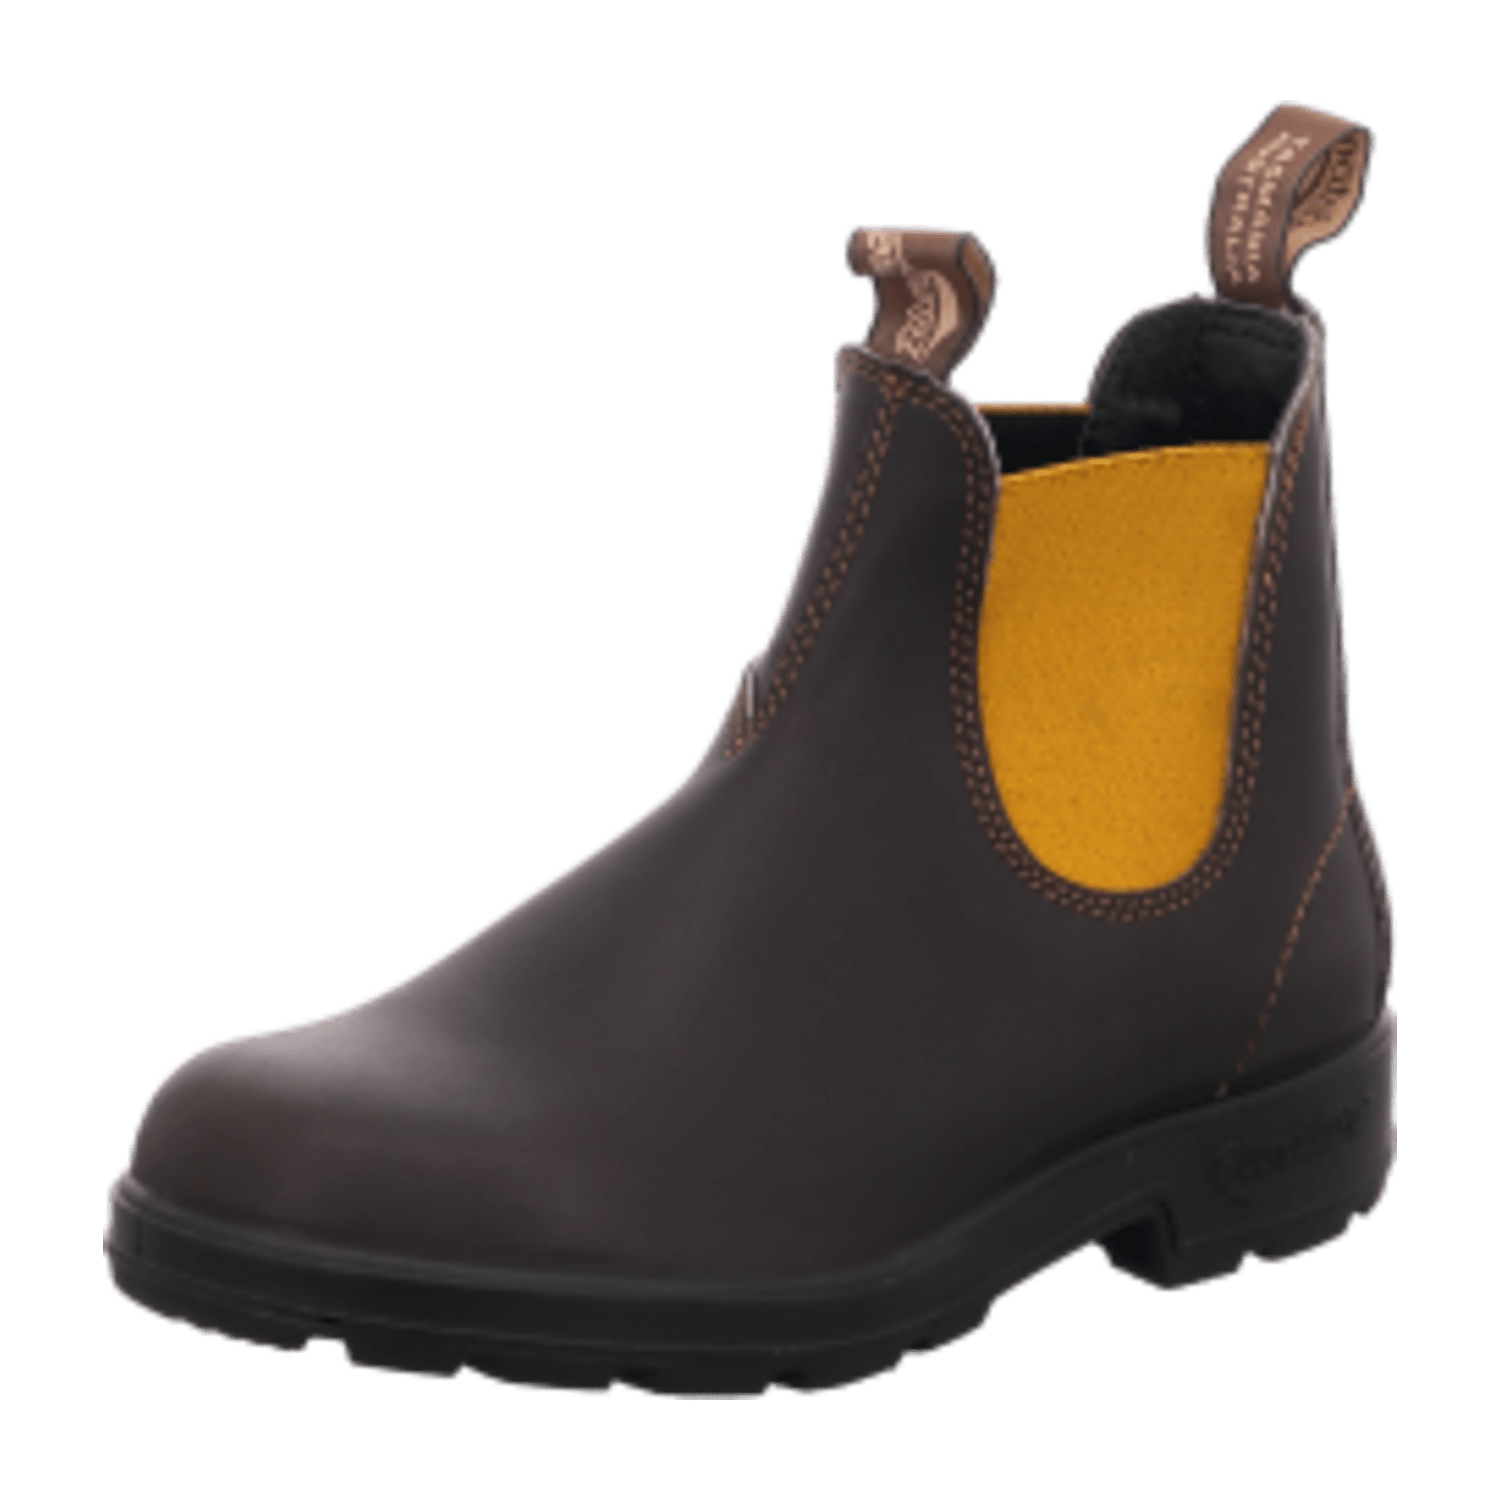 Blundstone Ankle-Bootie